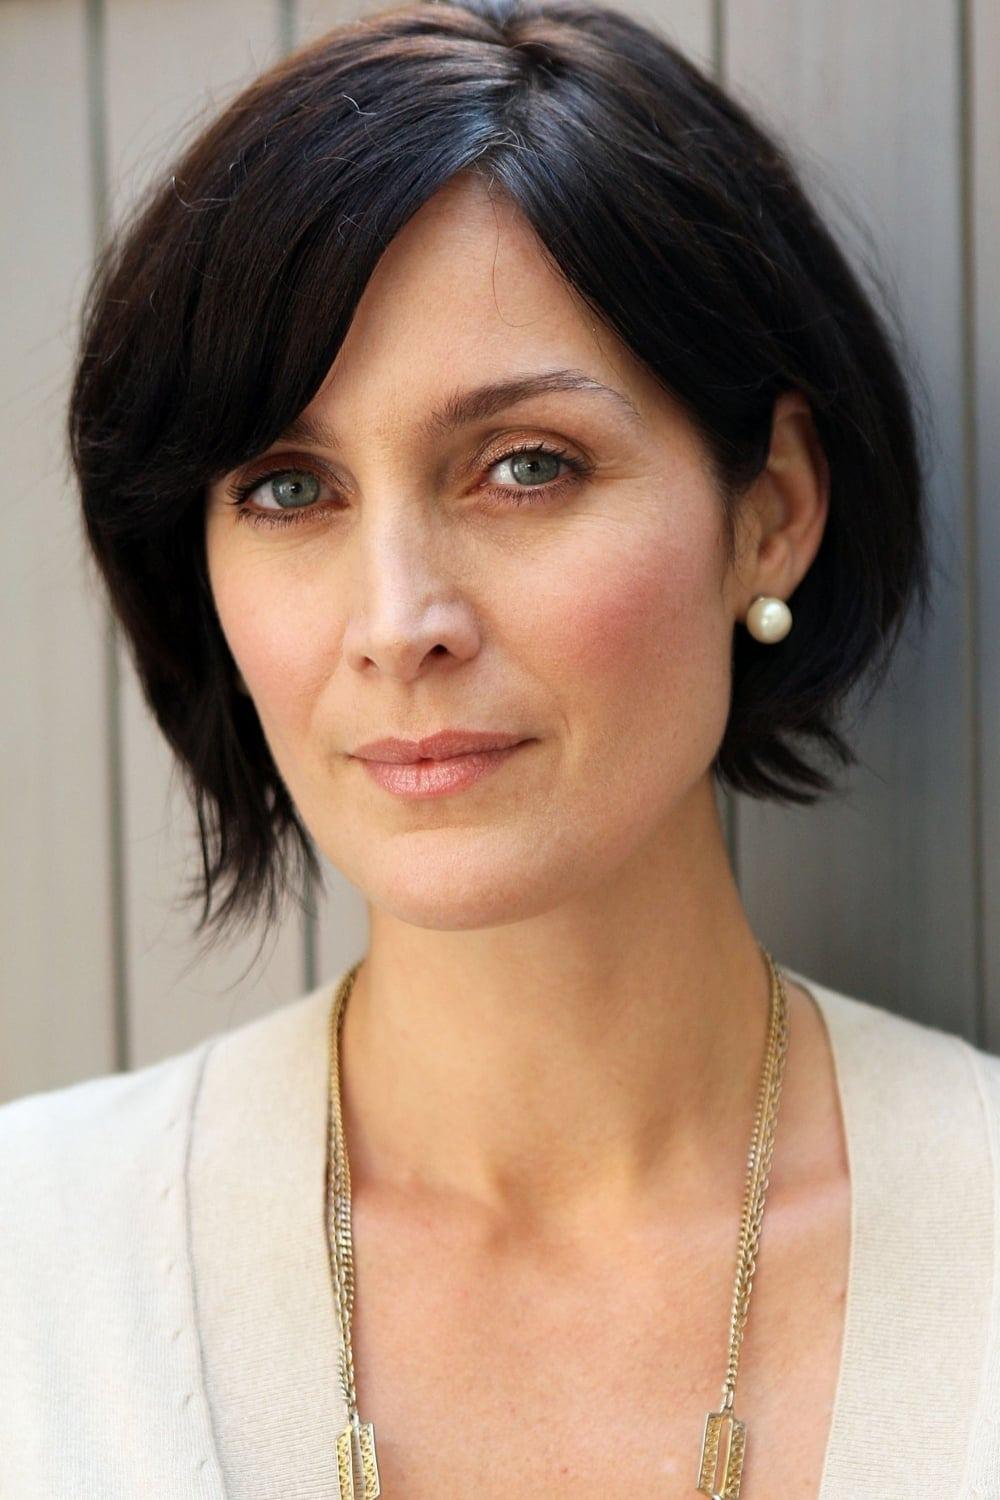 Carrie-Anne Moss | Trinity (voice)